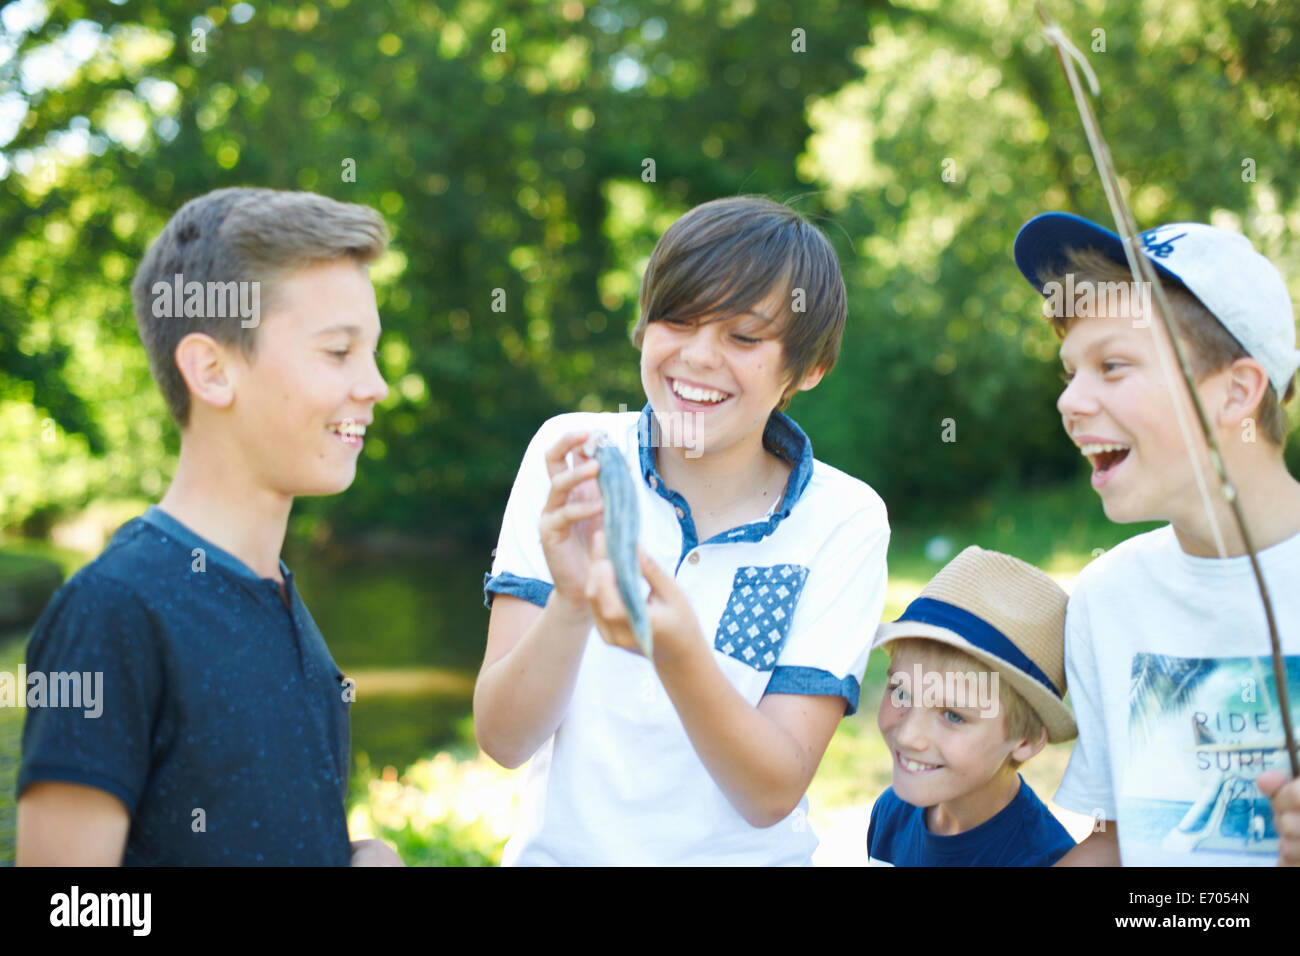 Boy holding fish with friends Stock Photo